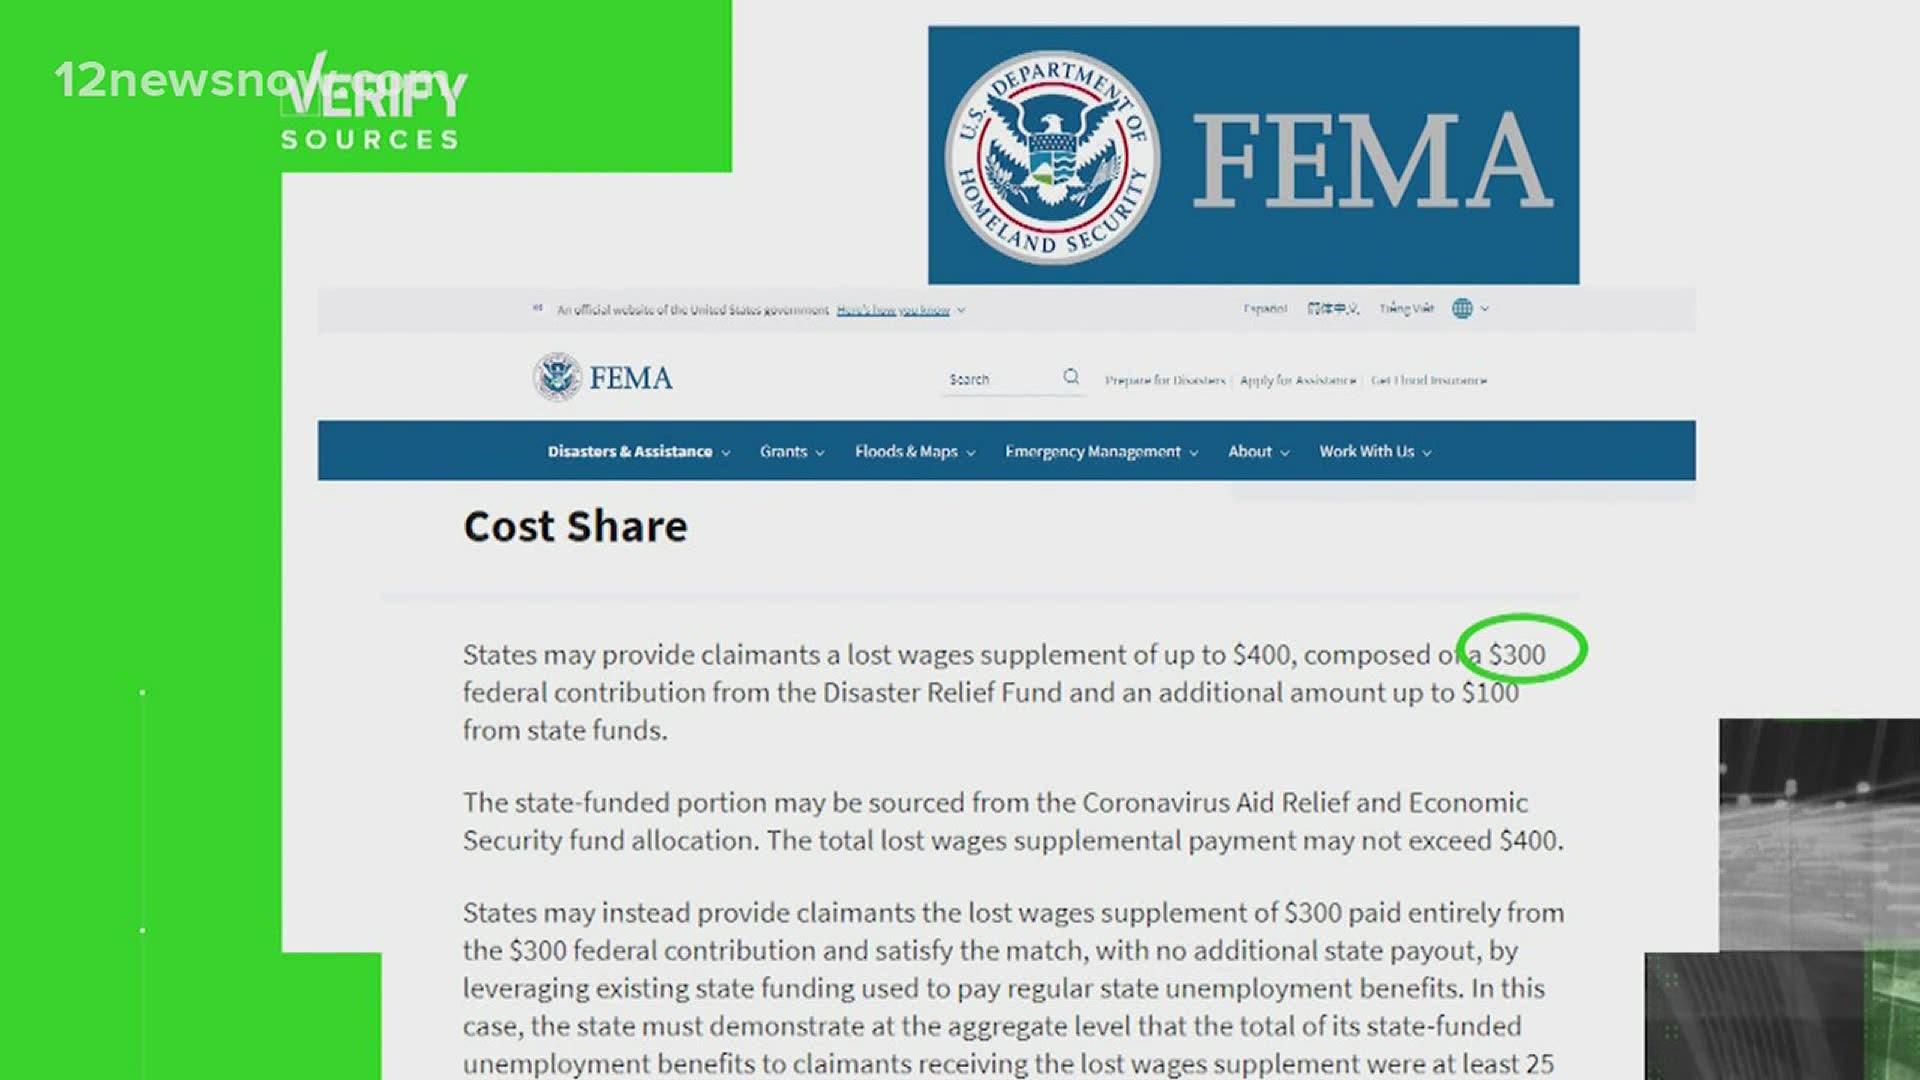 FEMA is not paying hazard pay to individuals who worked during the COVID-19 pandemic